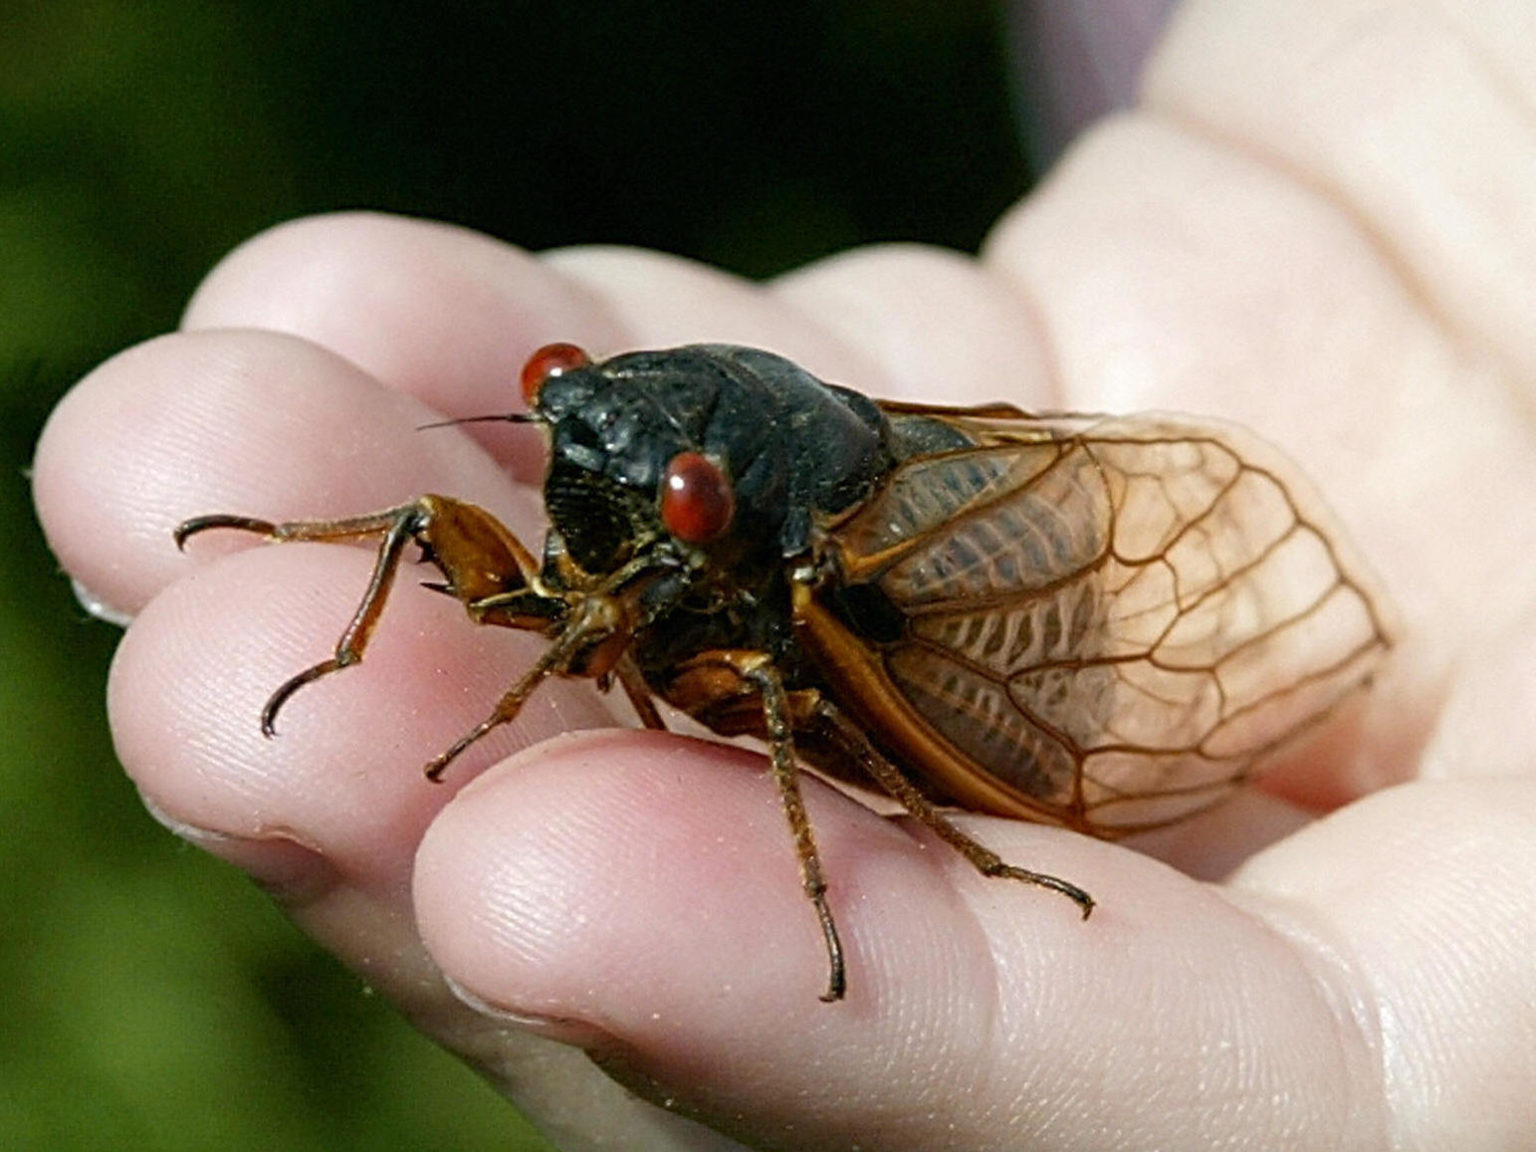 Swarm of cicadas expected to emerge any day News Without Politics